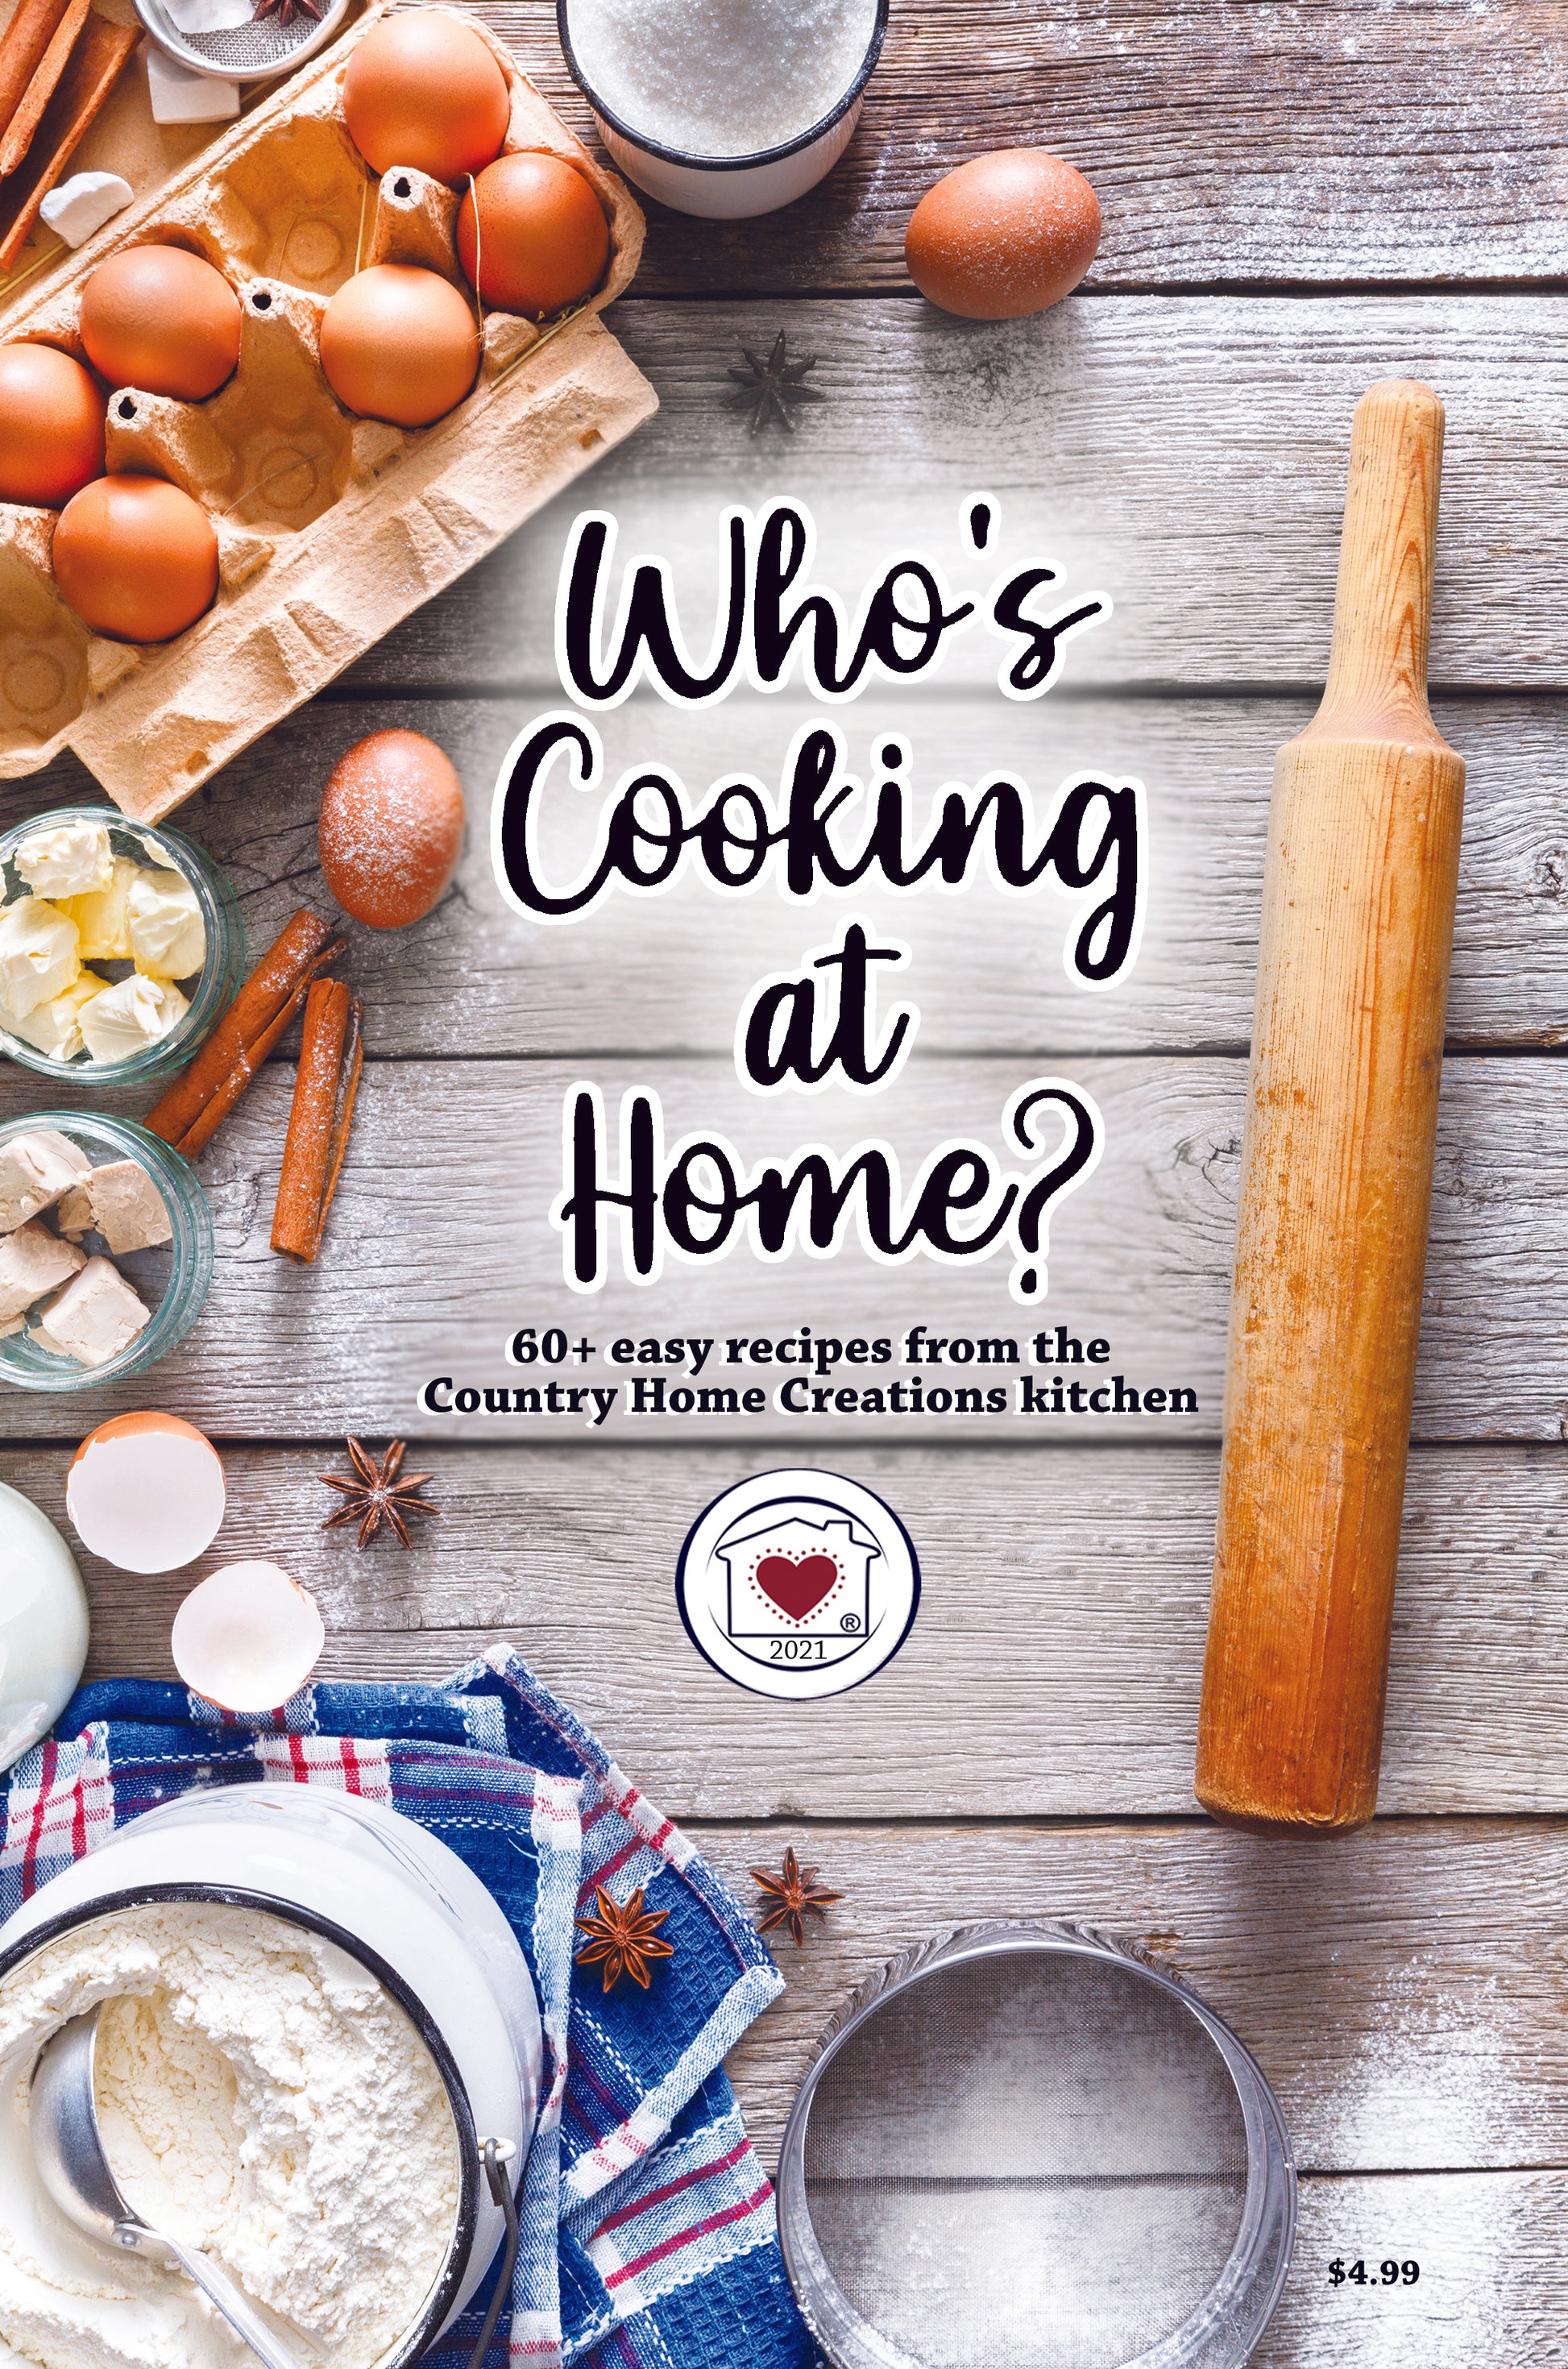 WHO'S COOKING AT HOME? COOKBOOKLET